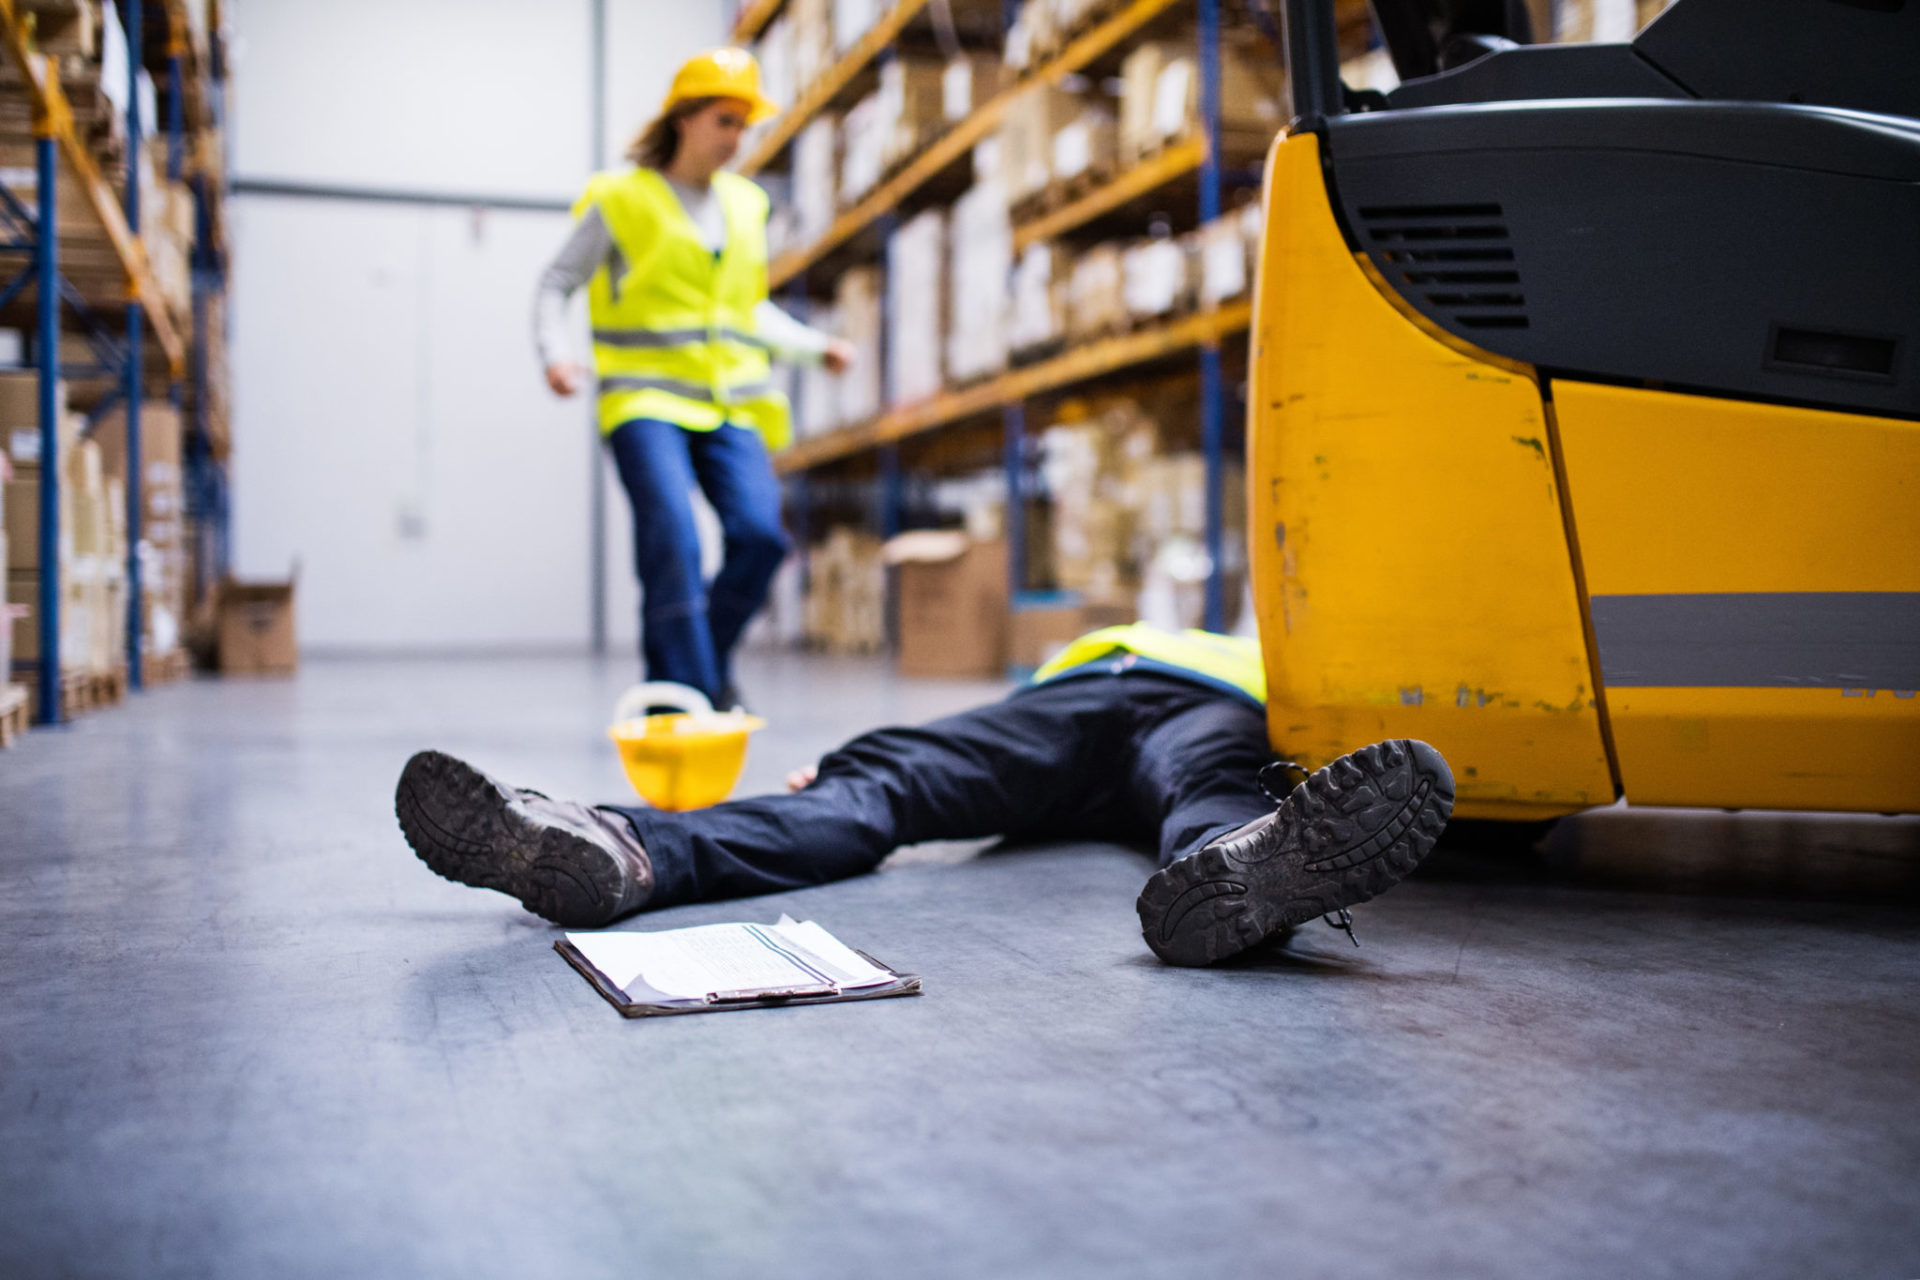 An accident in a warehouse. Woman running towards her colleague lying on the floor next to a forklift.